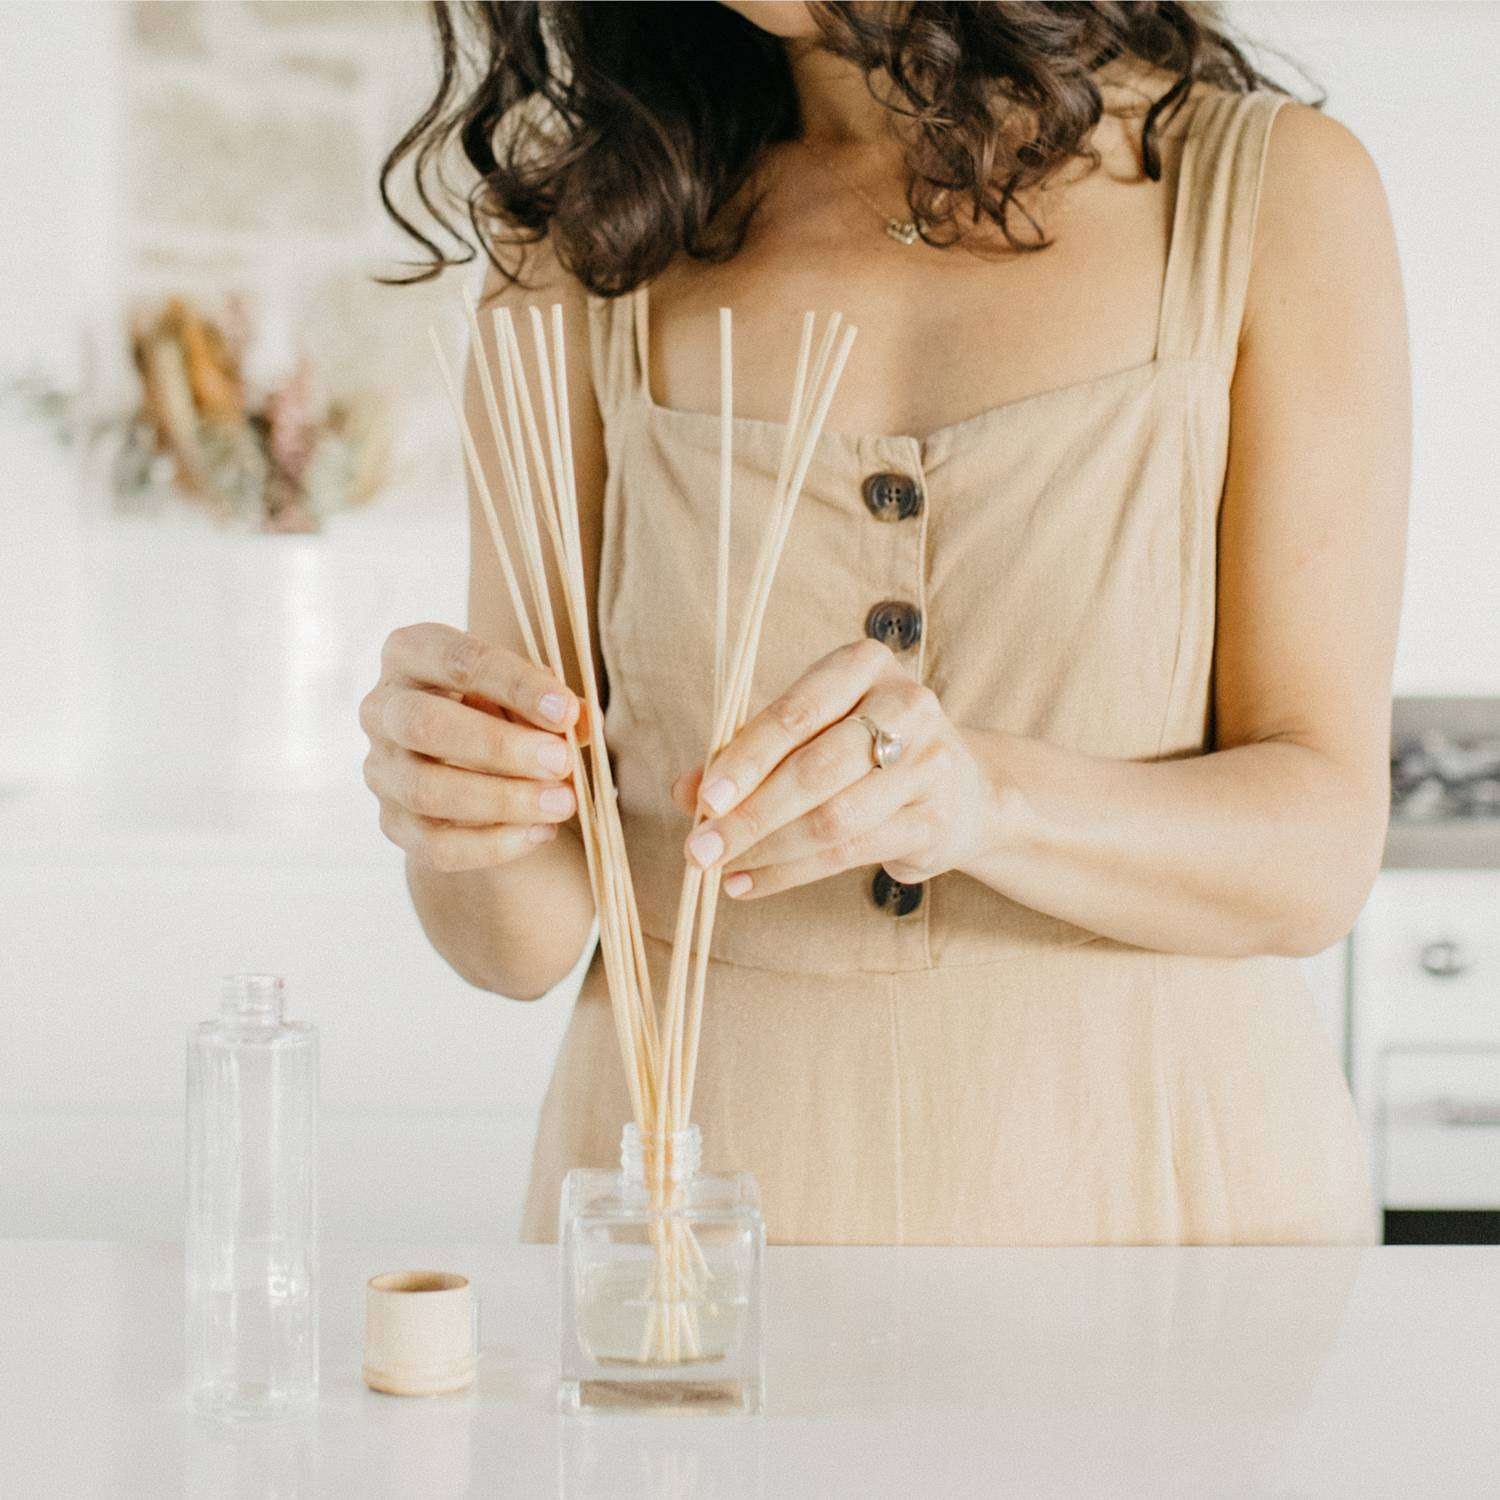 Fragrant Reed Diffusers